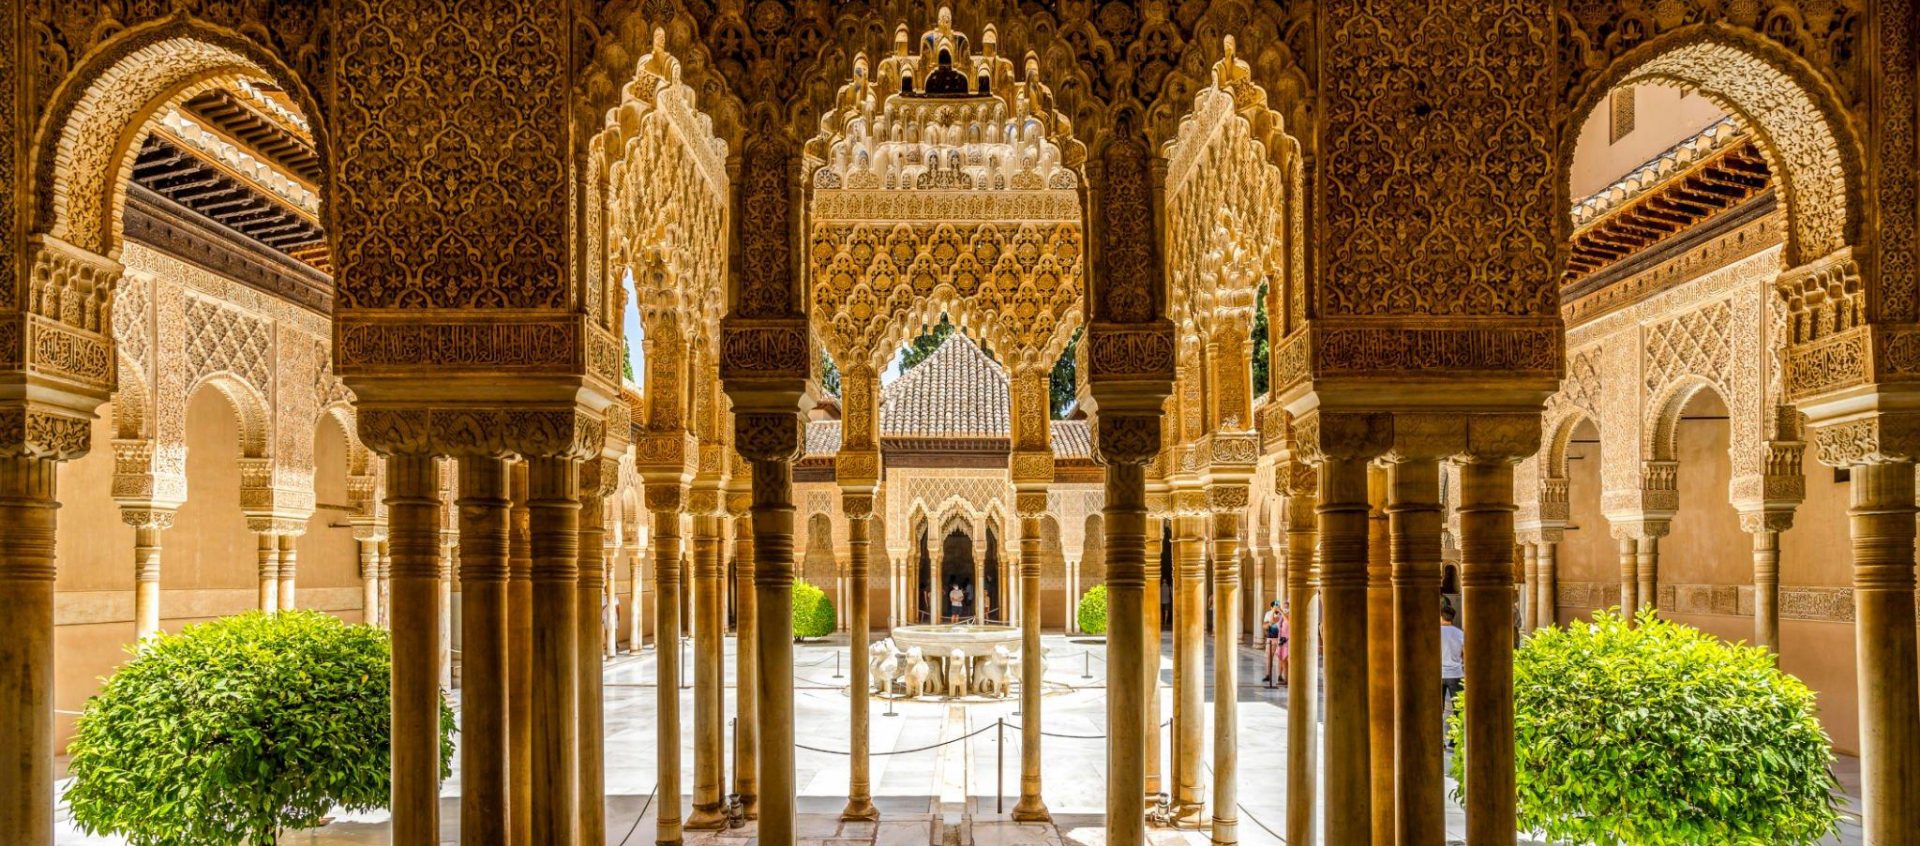 Beautiful columns and arches of one of the palaces that can be enjoyed during a visit to the Alhambra of Granada.